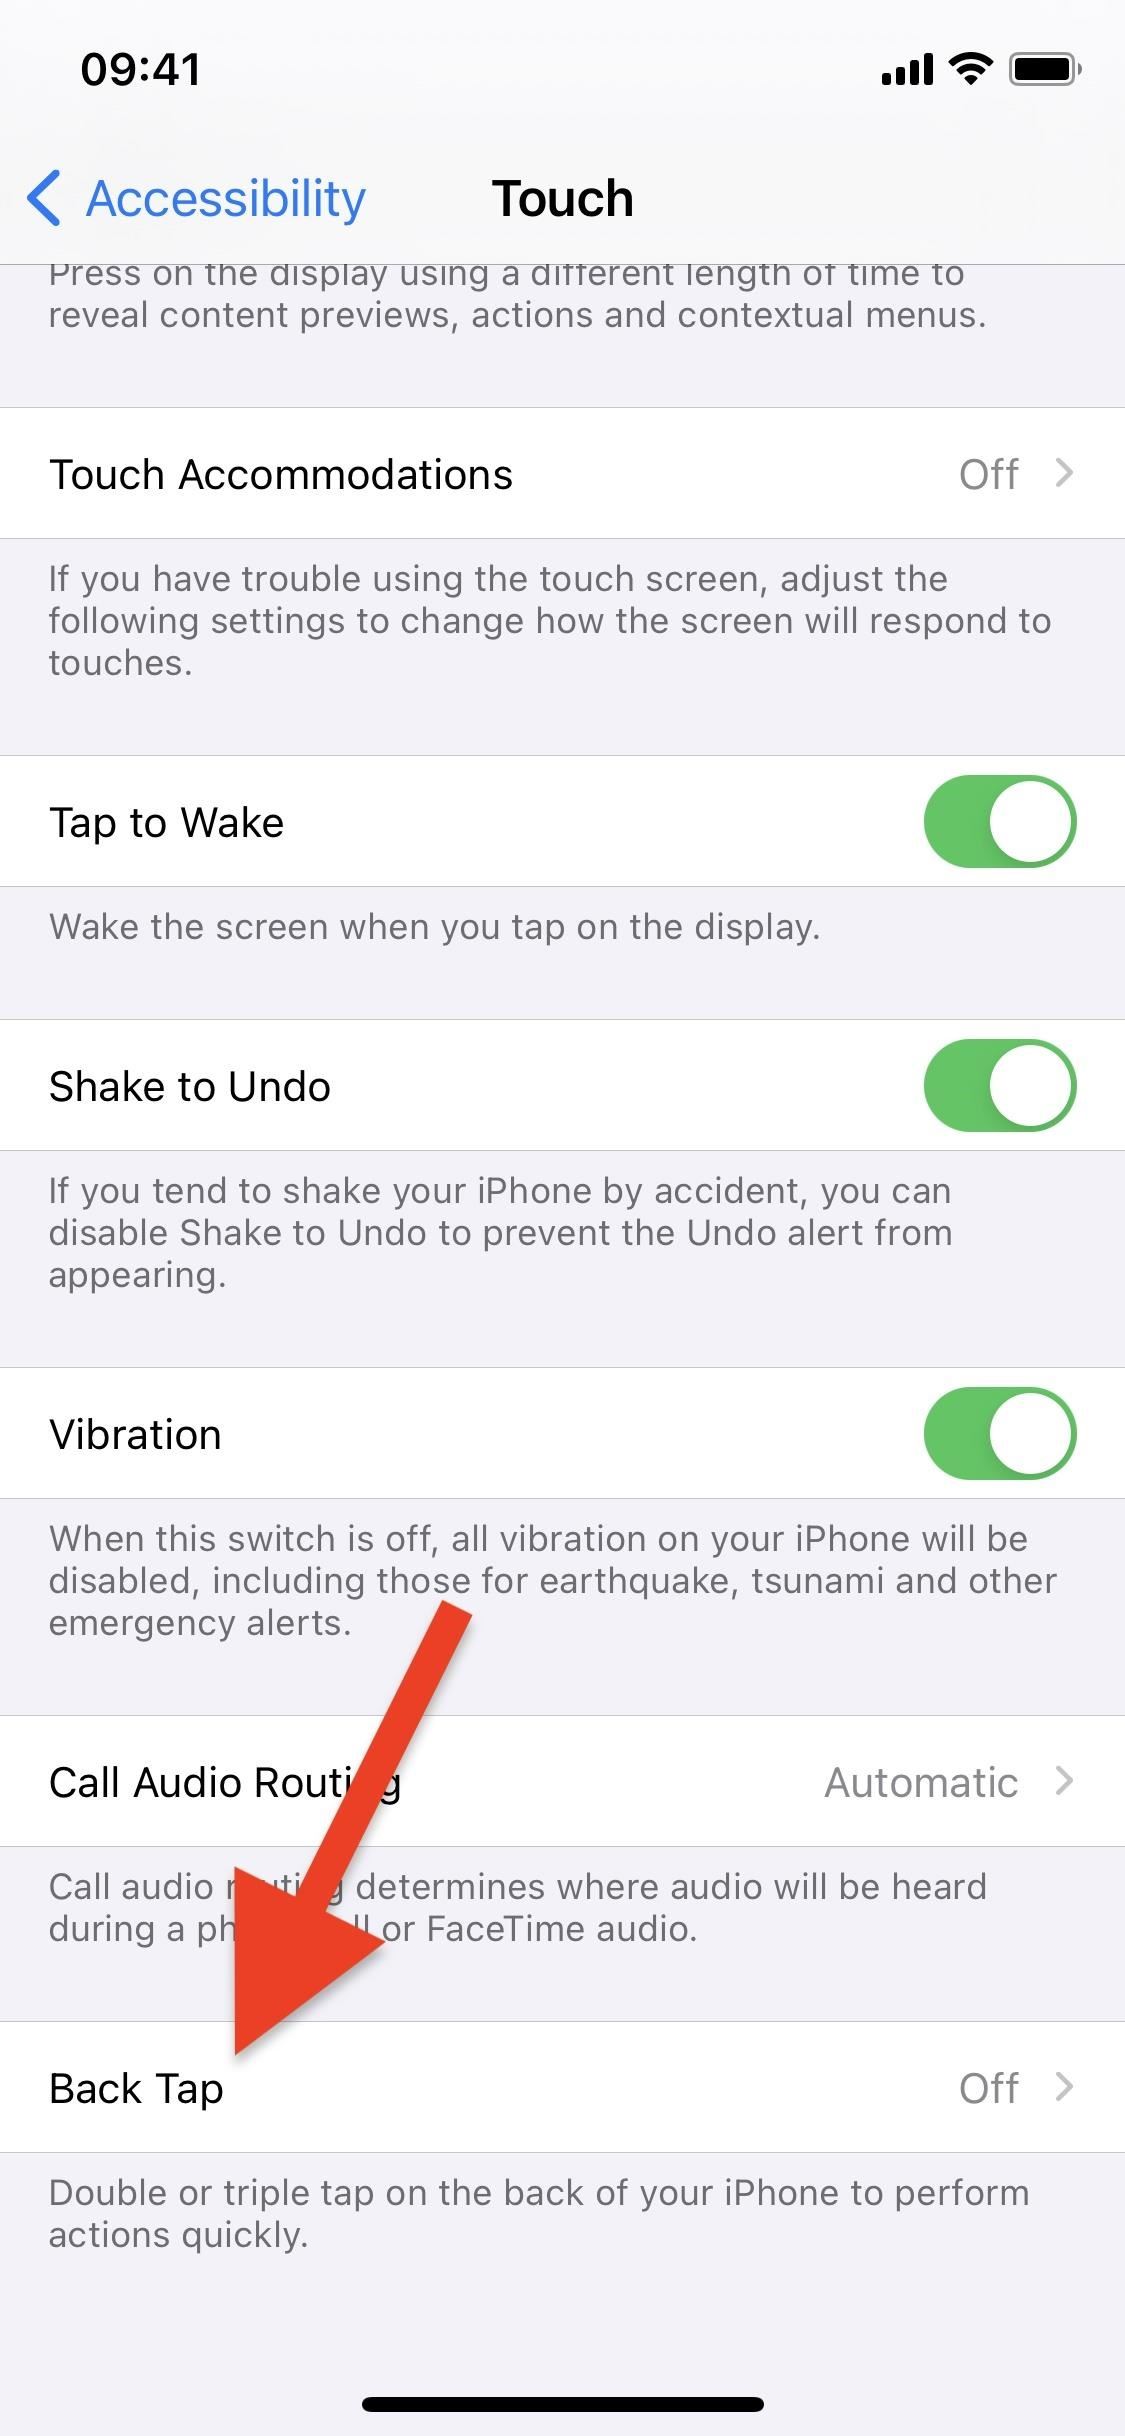 This Shortcut Translates What You Say to Text in Any Language in Any App on Your iPhone